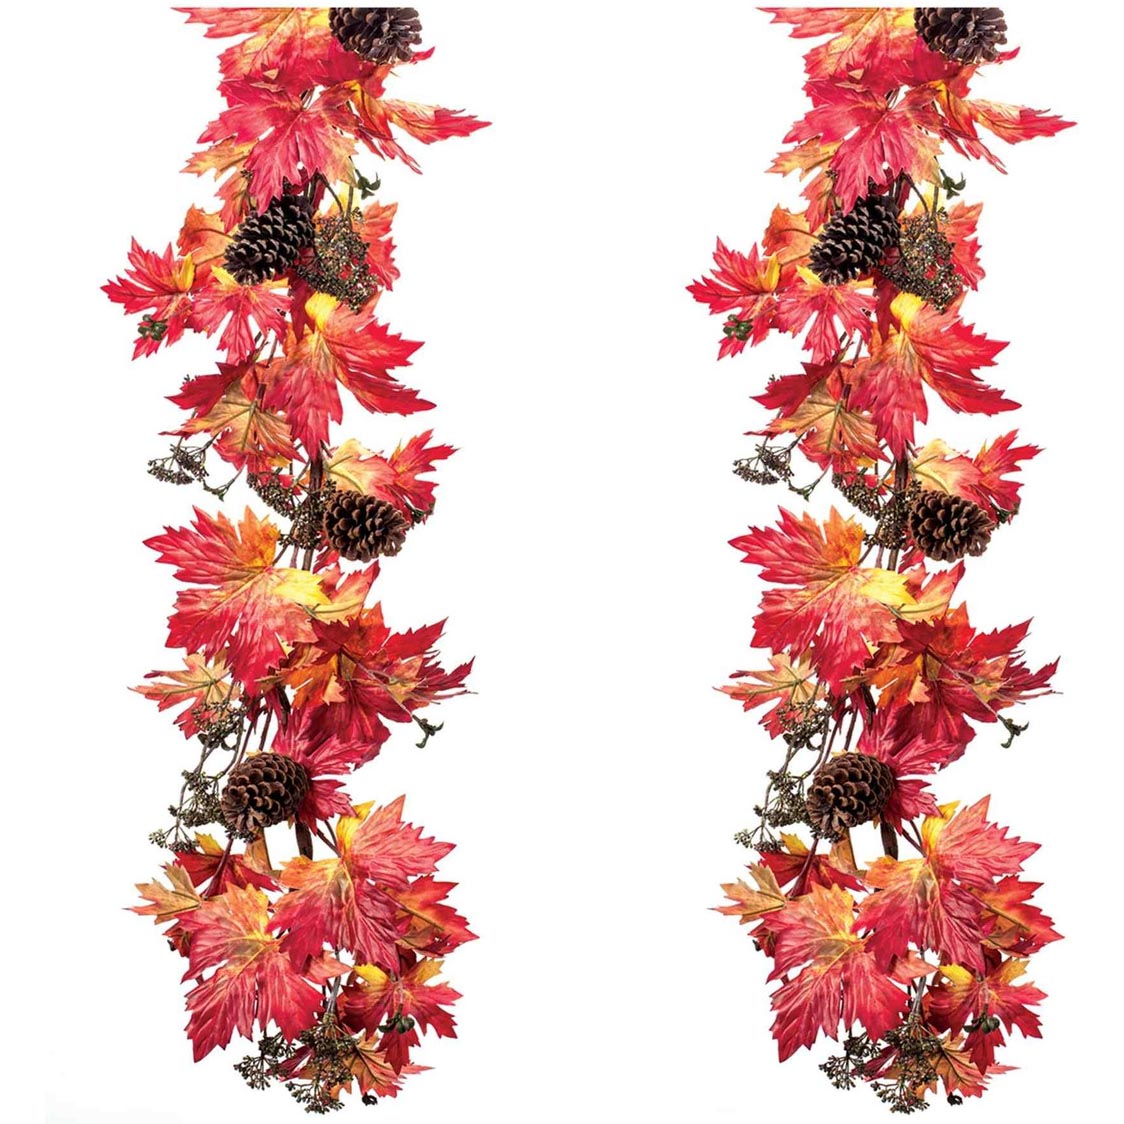 Melrose 5.7' Maple Leaf with Pinecone Fall Harvest Garlands - Red/Orange (Set of 2) - Thanksgiving & Holiday Decoration